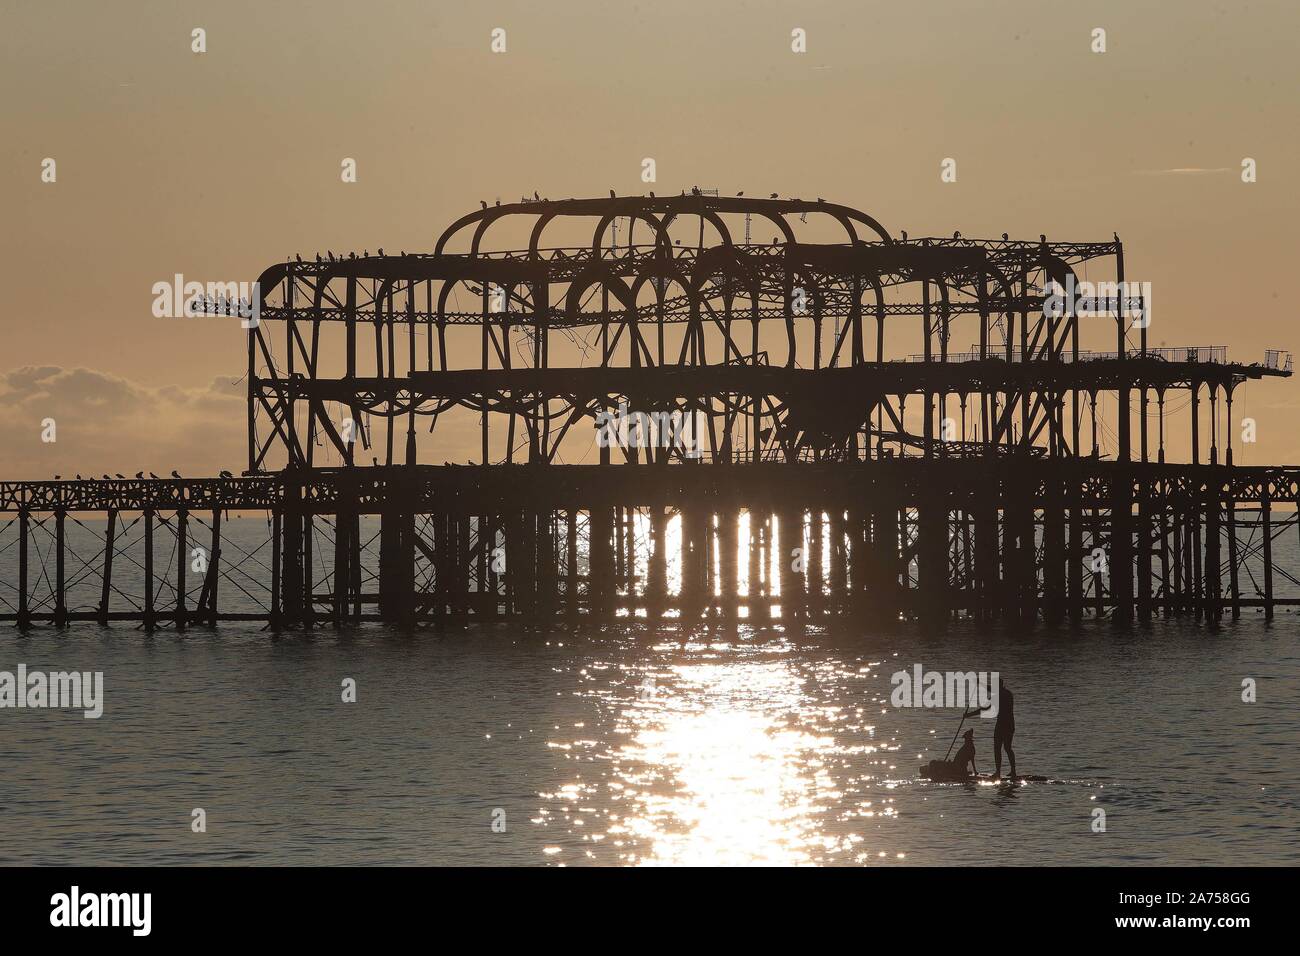 As the temperatures rise inside Westminster this evening as the Brexit voting hots up, in Brighton it's chilled as locals enjoy the Indian Summer padd Stock Photo